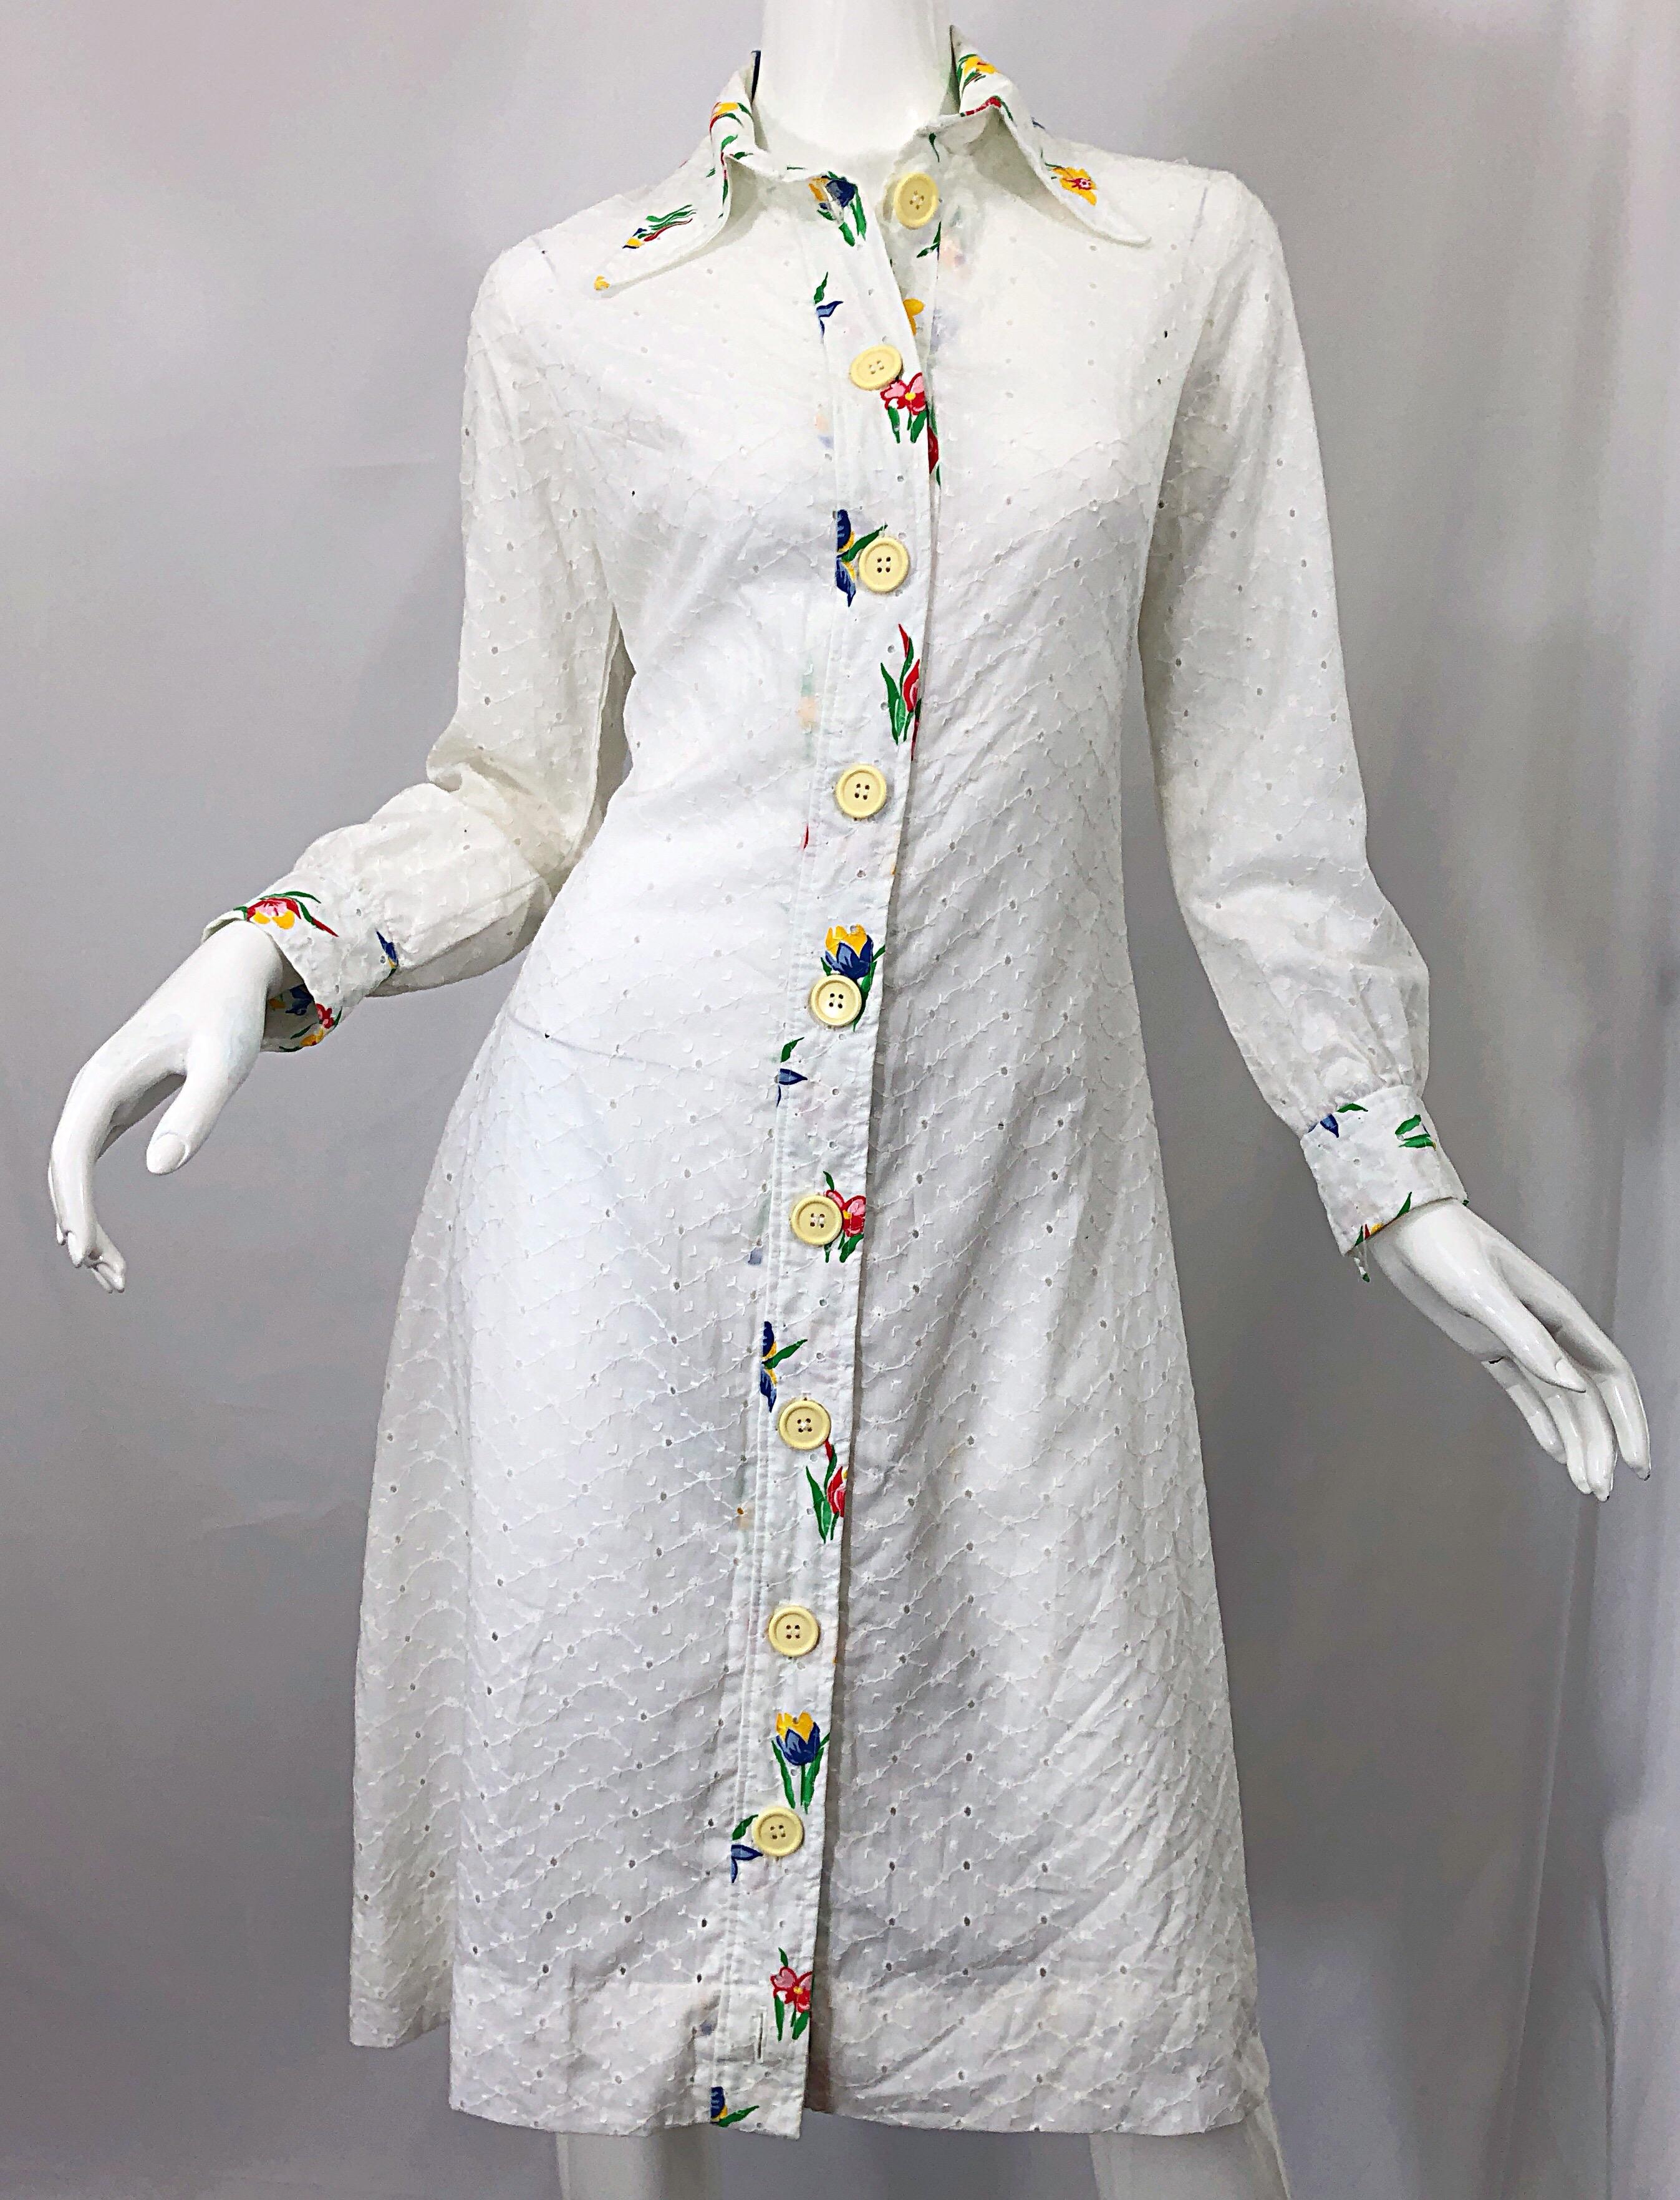 1970s Joseph Magnin White Eyelet Cotton Embrodiered Vintage 70s Shirt Dress For Sale 3